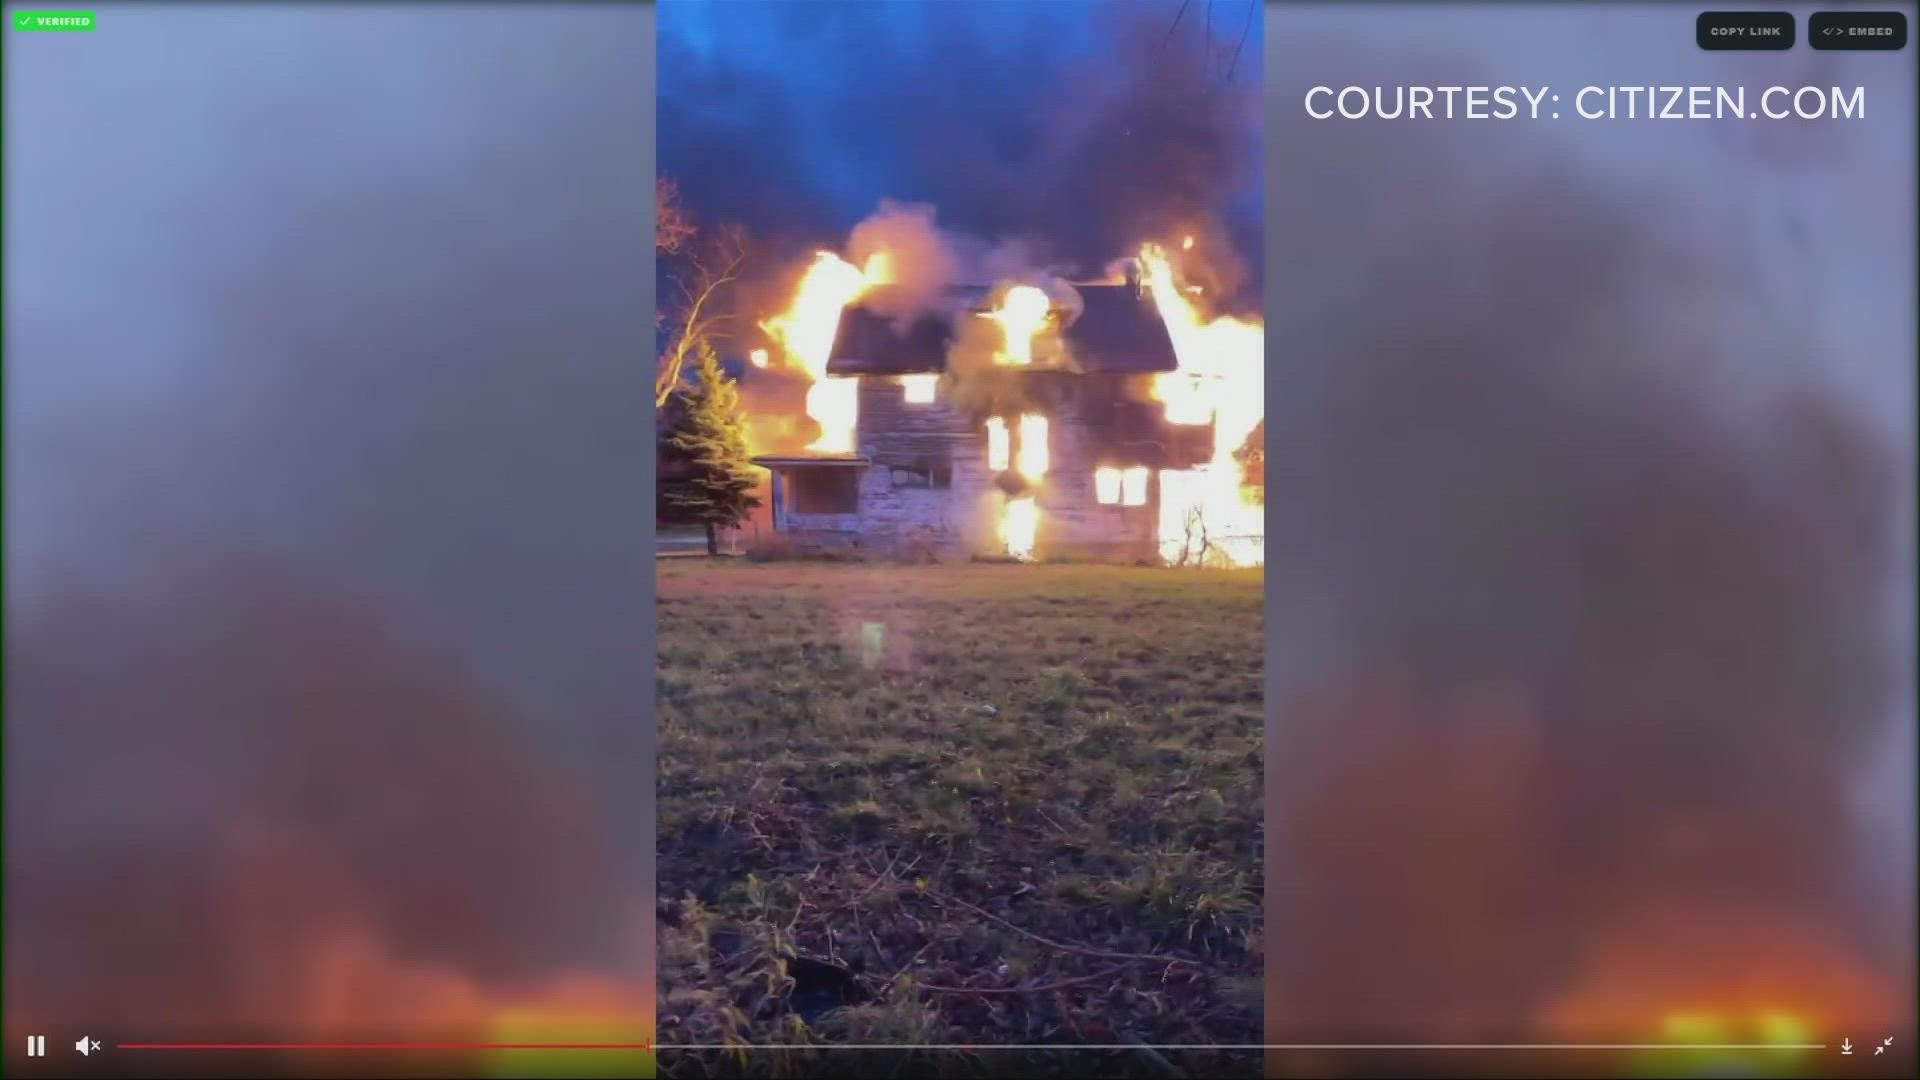 Fire officials say the house was fully engulfed in flames when they arrived on scene.